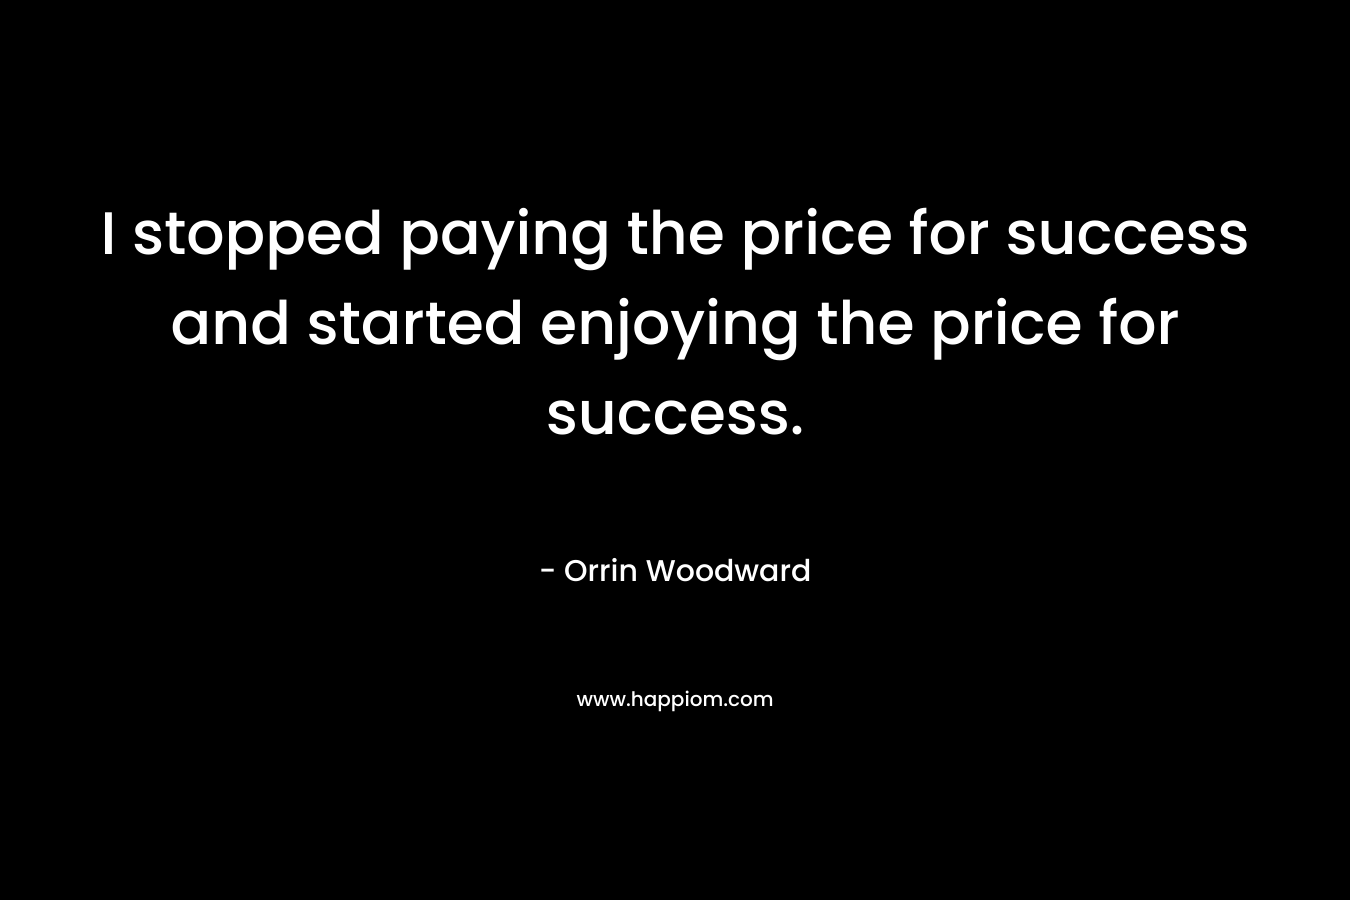 I stopped paying the price for success and started enjoying the price for success. – Orrin Woodward